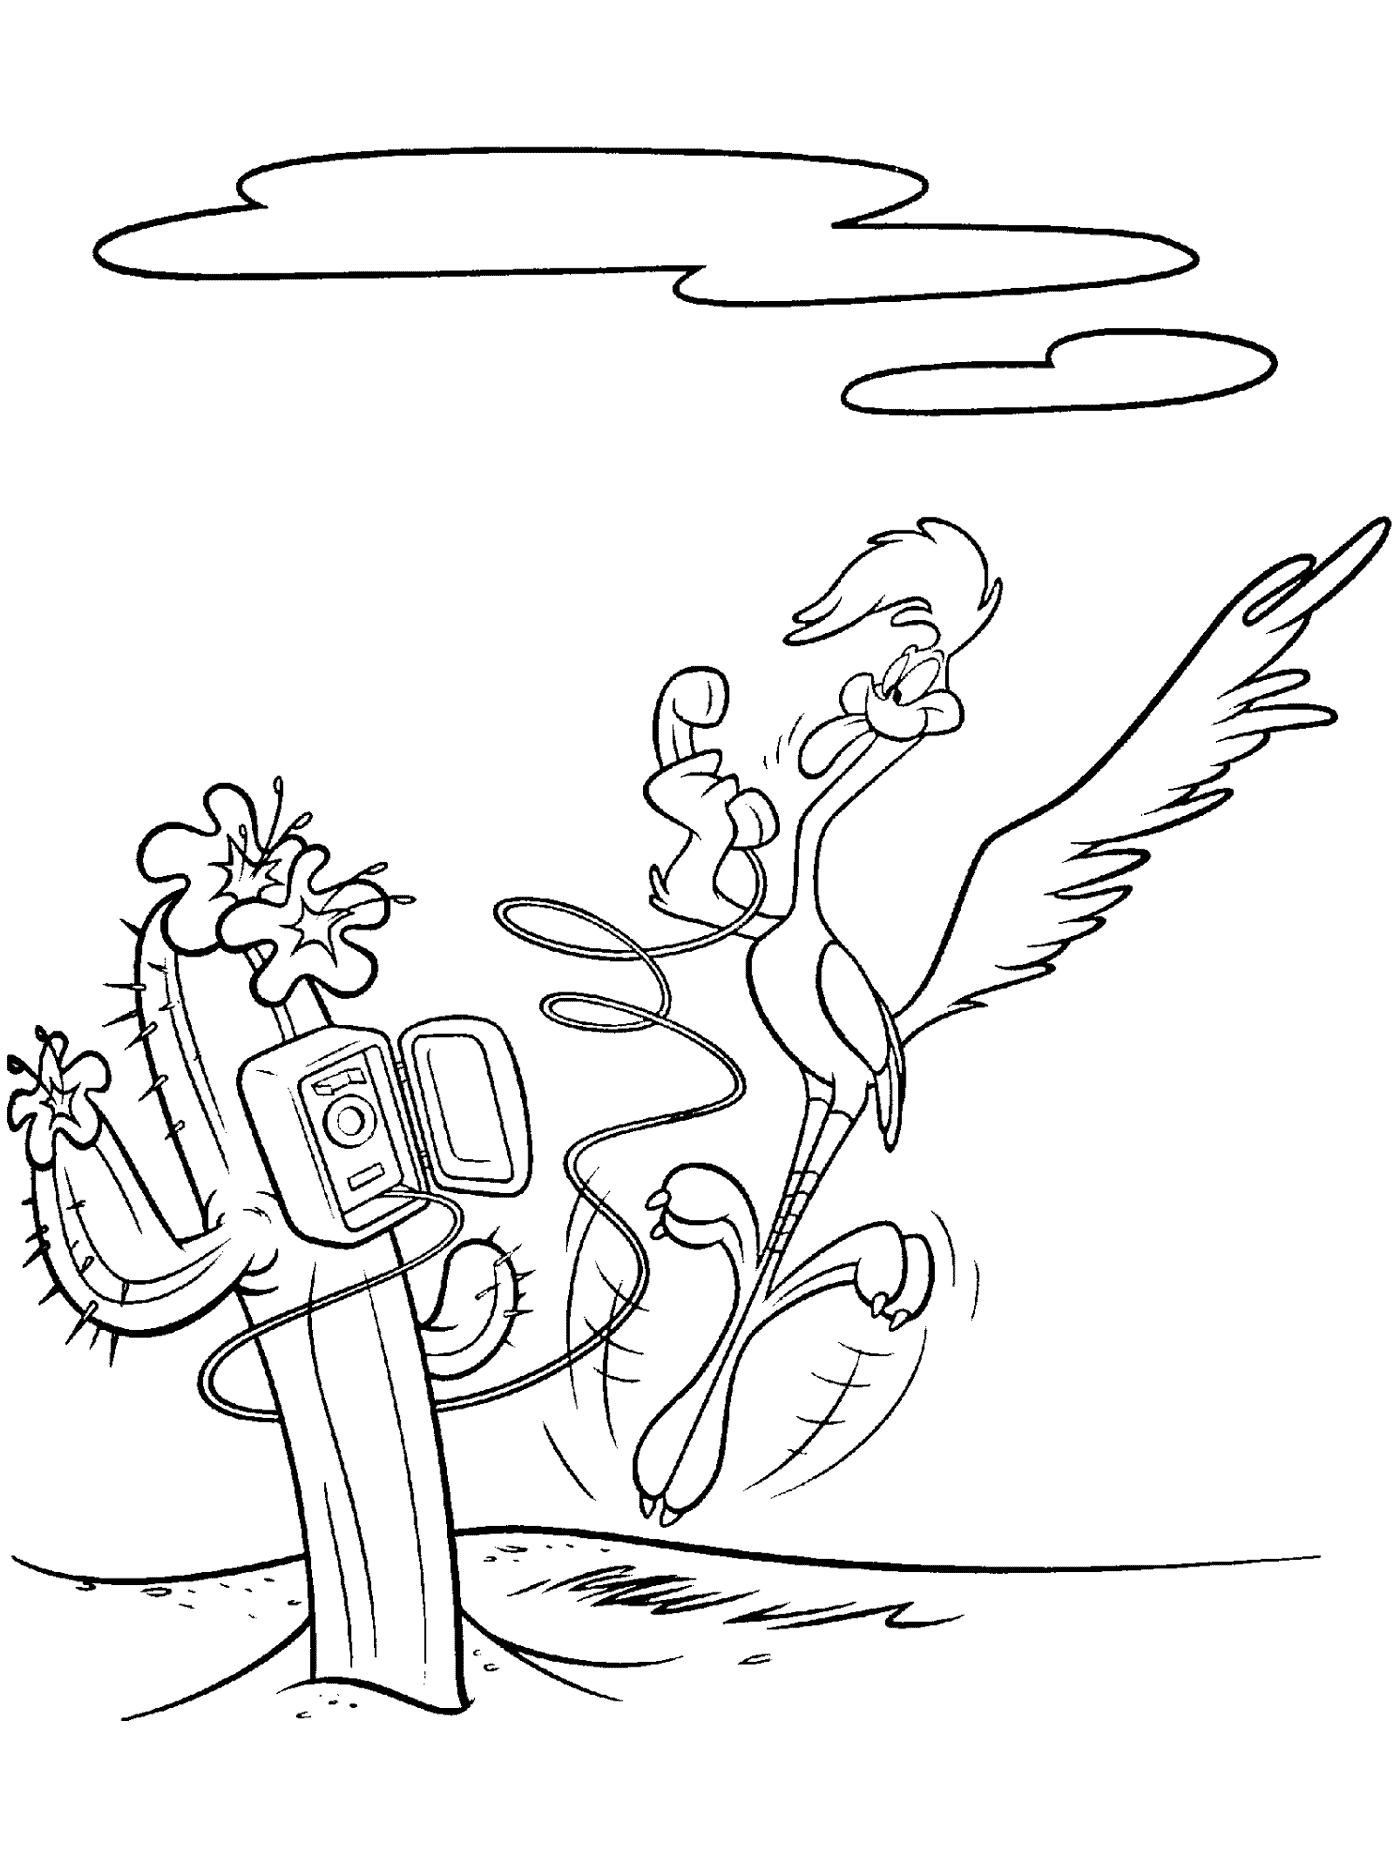 Road Runner Taunting Wile E Coyote Coloring Pages